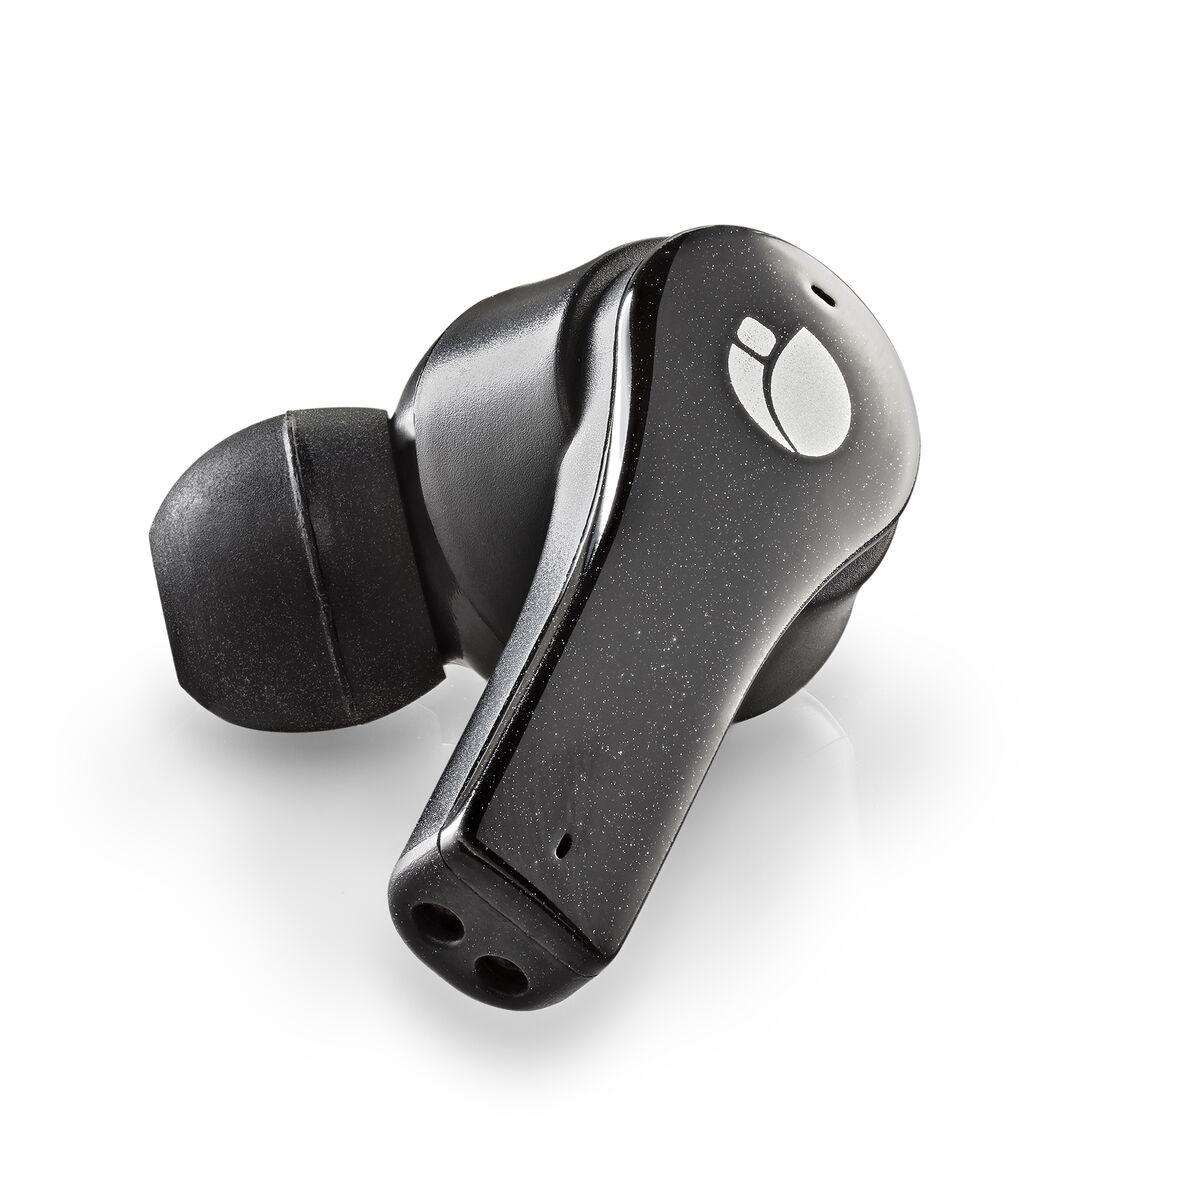 Auriculares Bluetooth NGS ARTICA BLOOM Negro